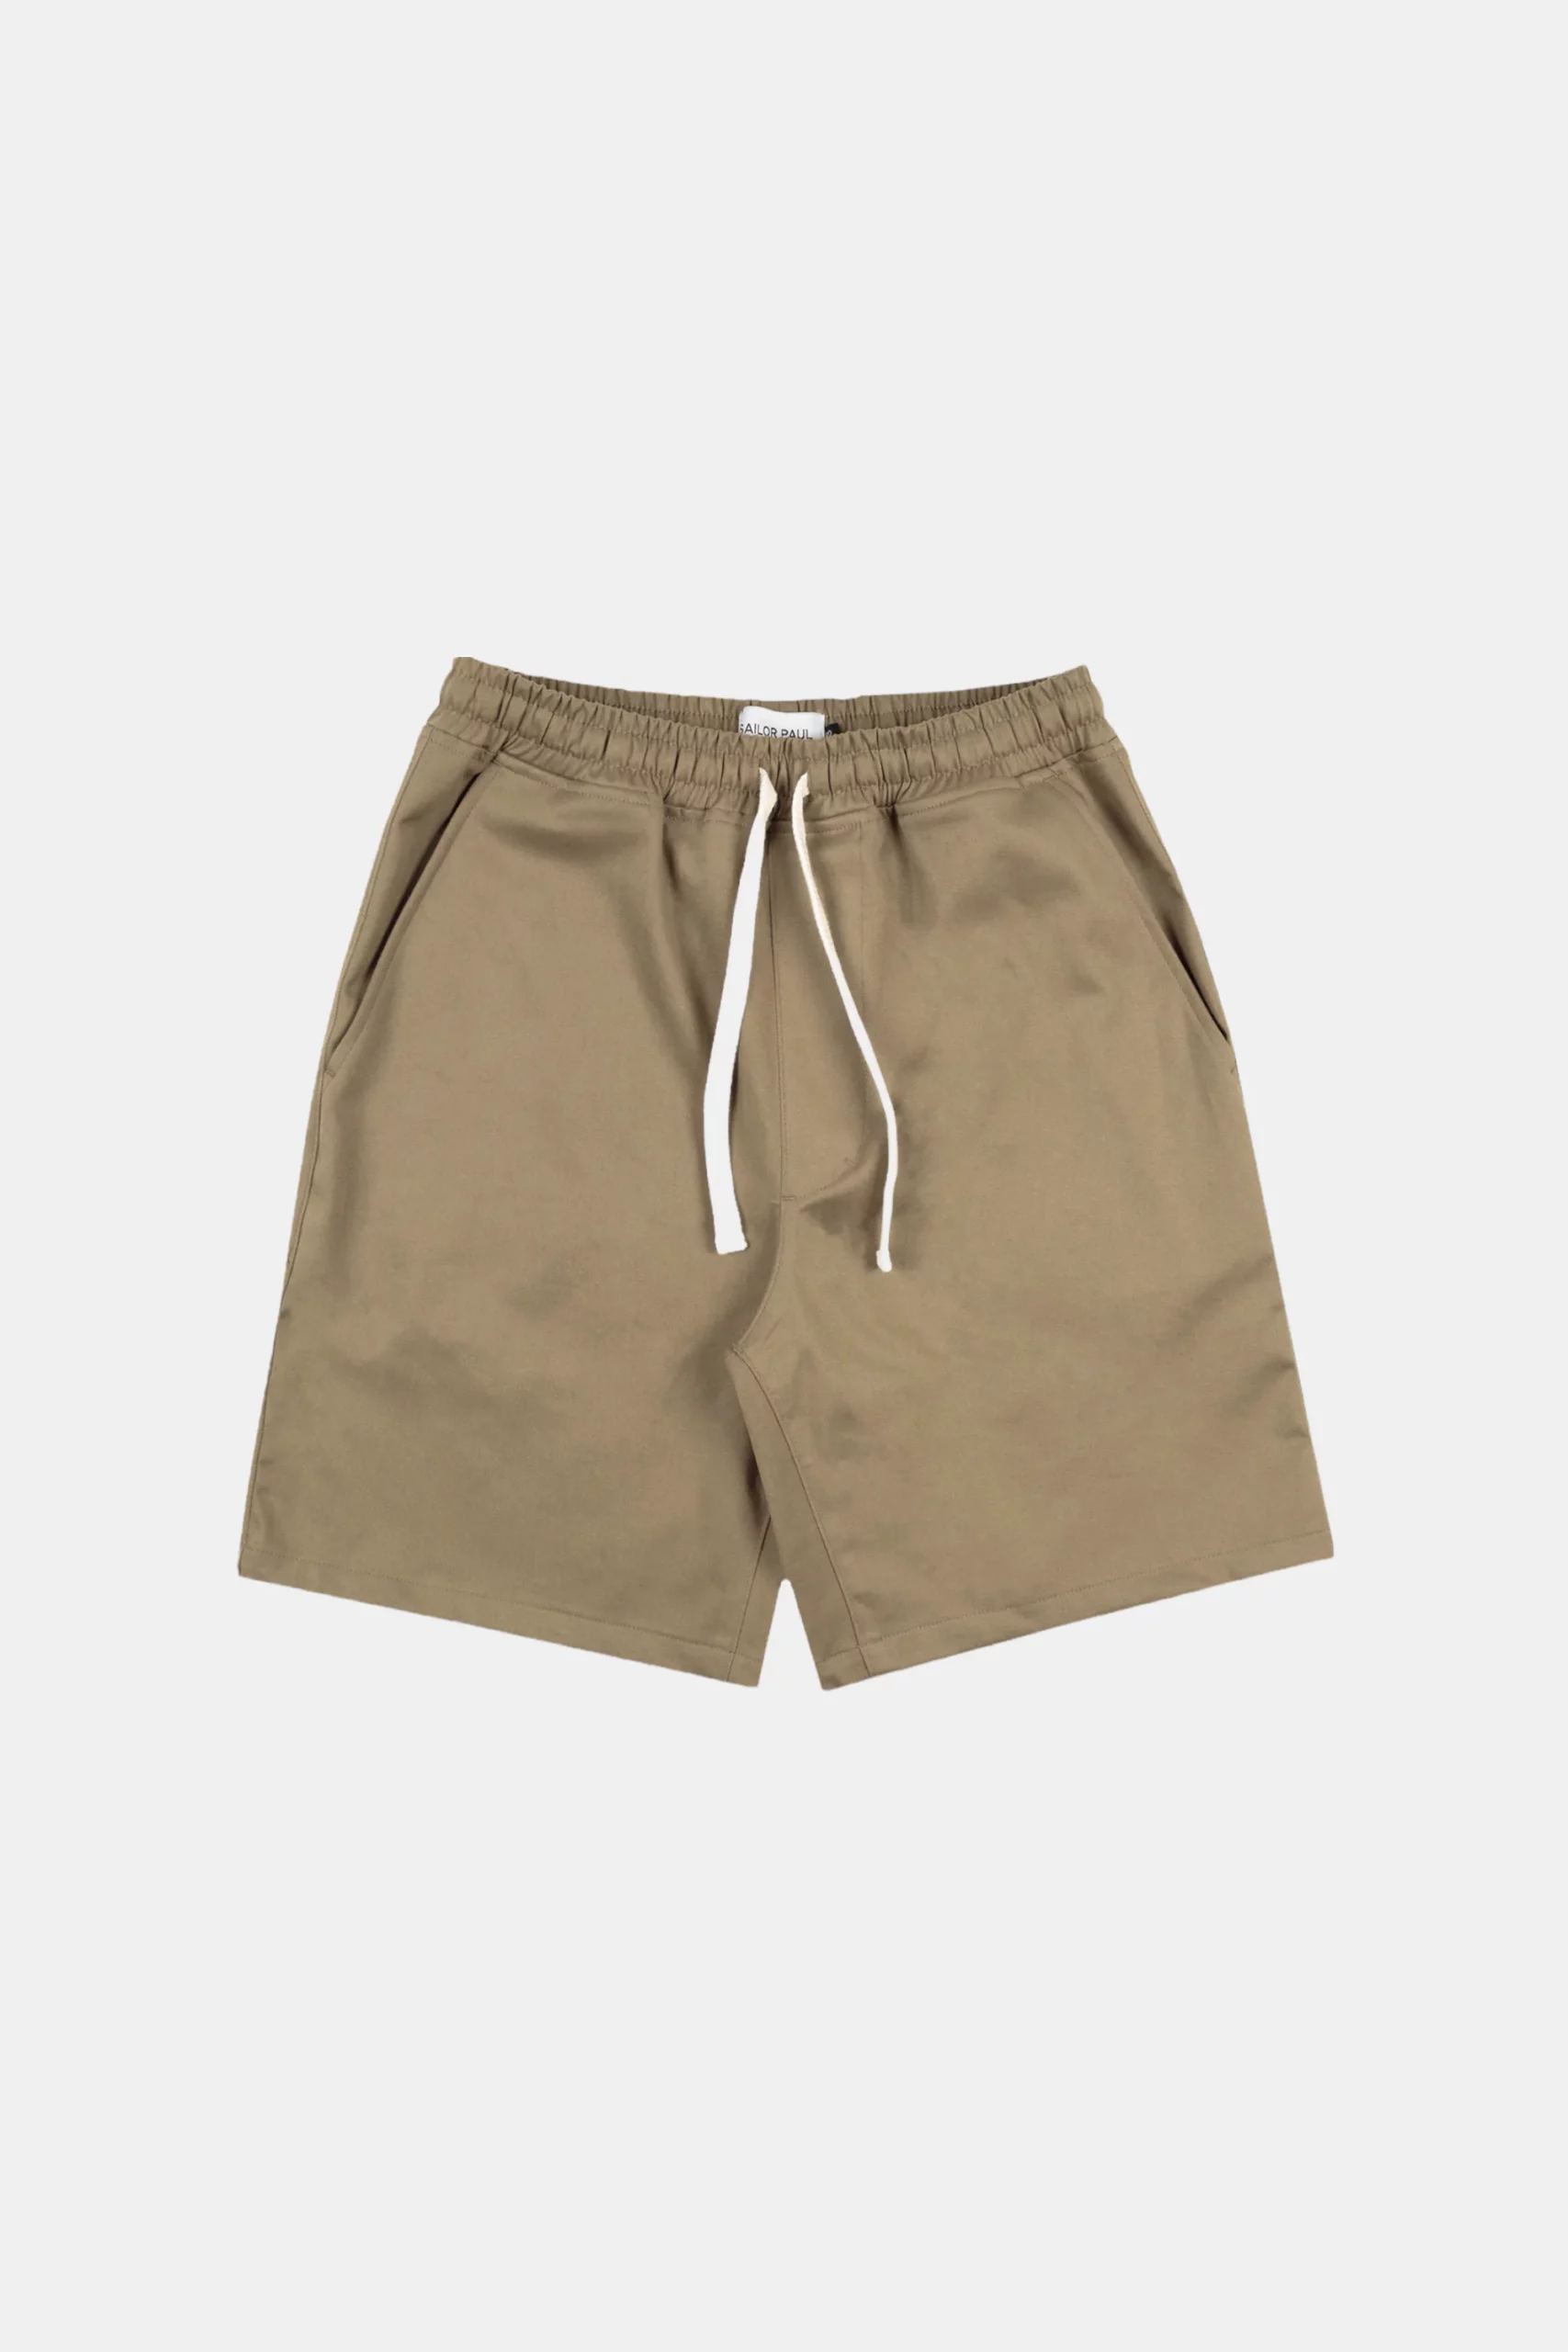 shorty sailorpaul relaed twill beige 1